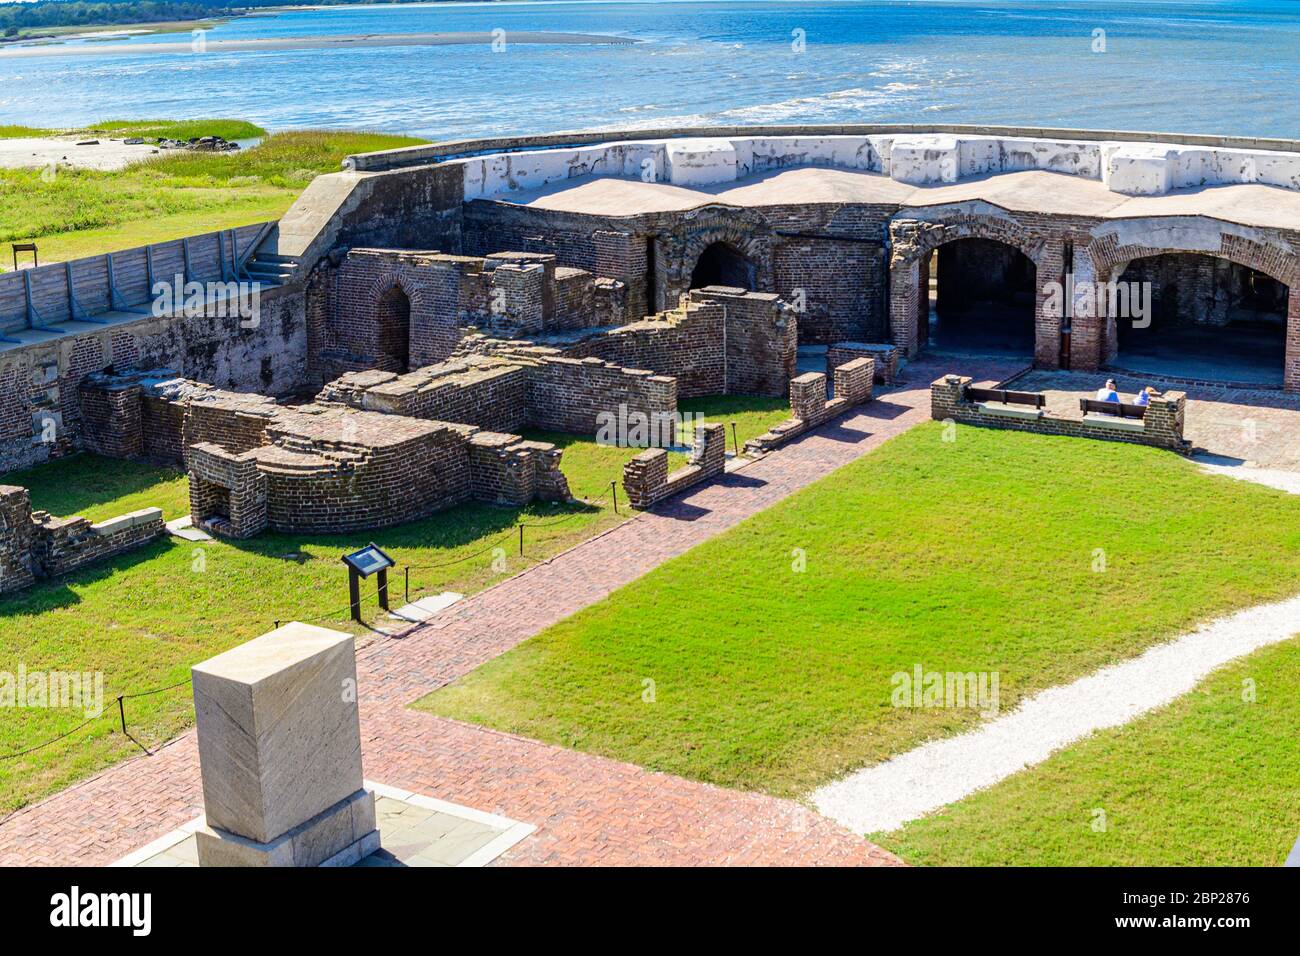 Fort Sumter South Carolina site of first battle of Civil War. Stock Photo